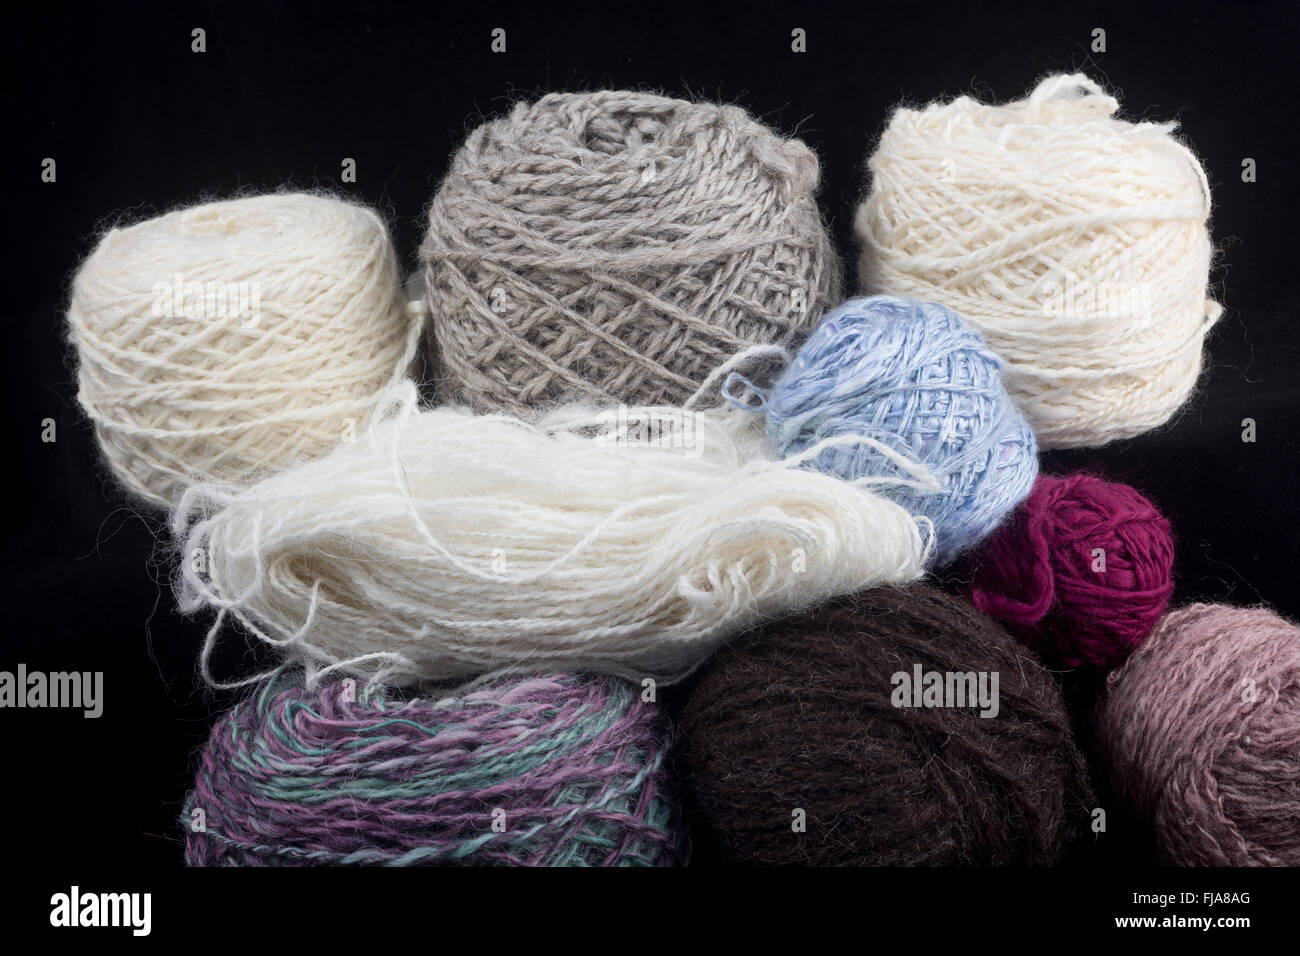 Balls of wool on a black background Stock Photo